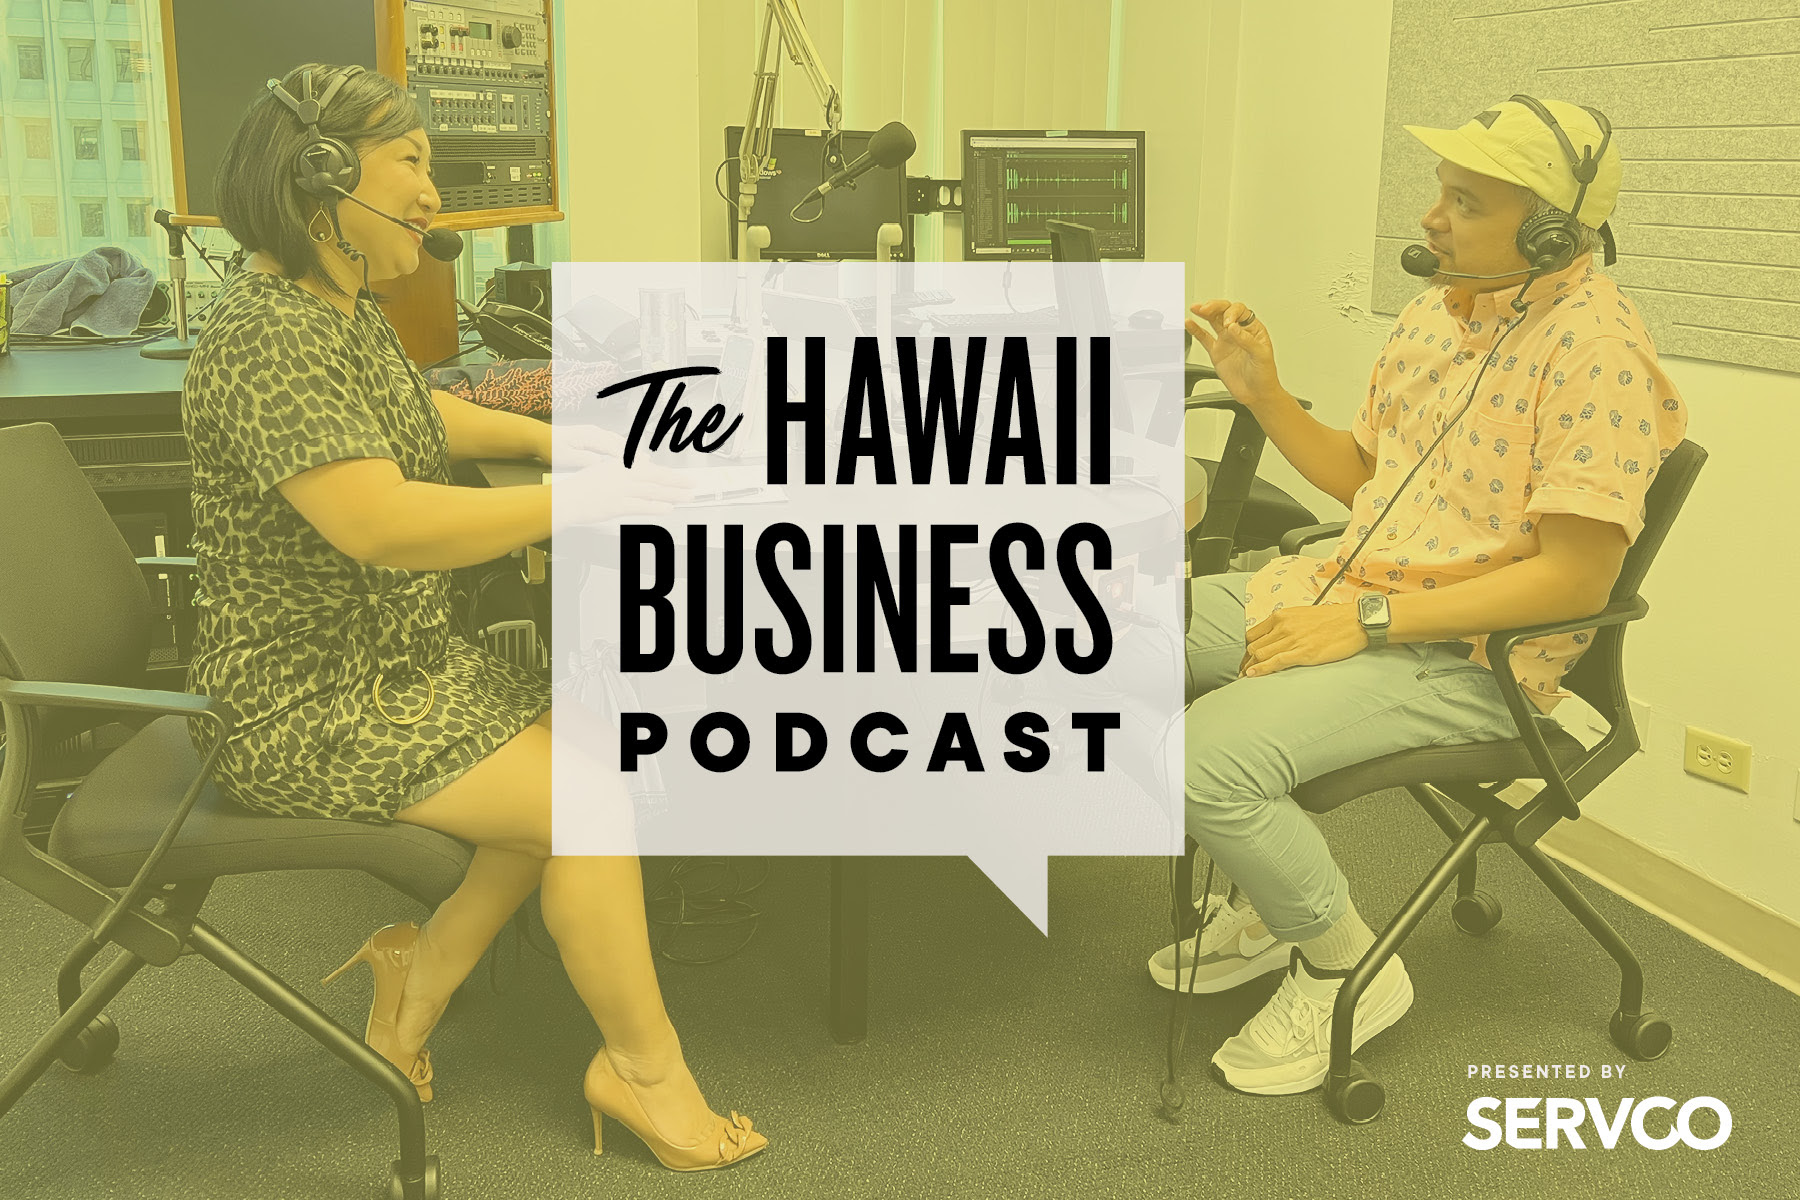 Click here to listen to the this episode of The Hawaii Business Podcast featuring Kuhao Zane!